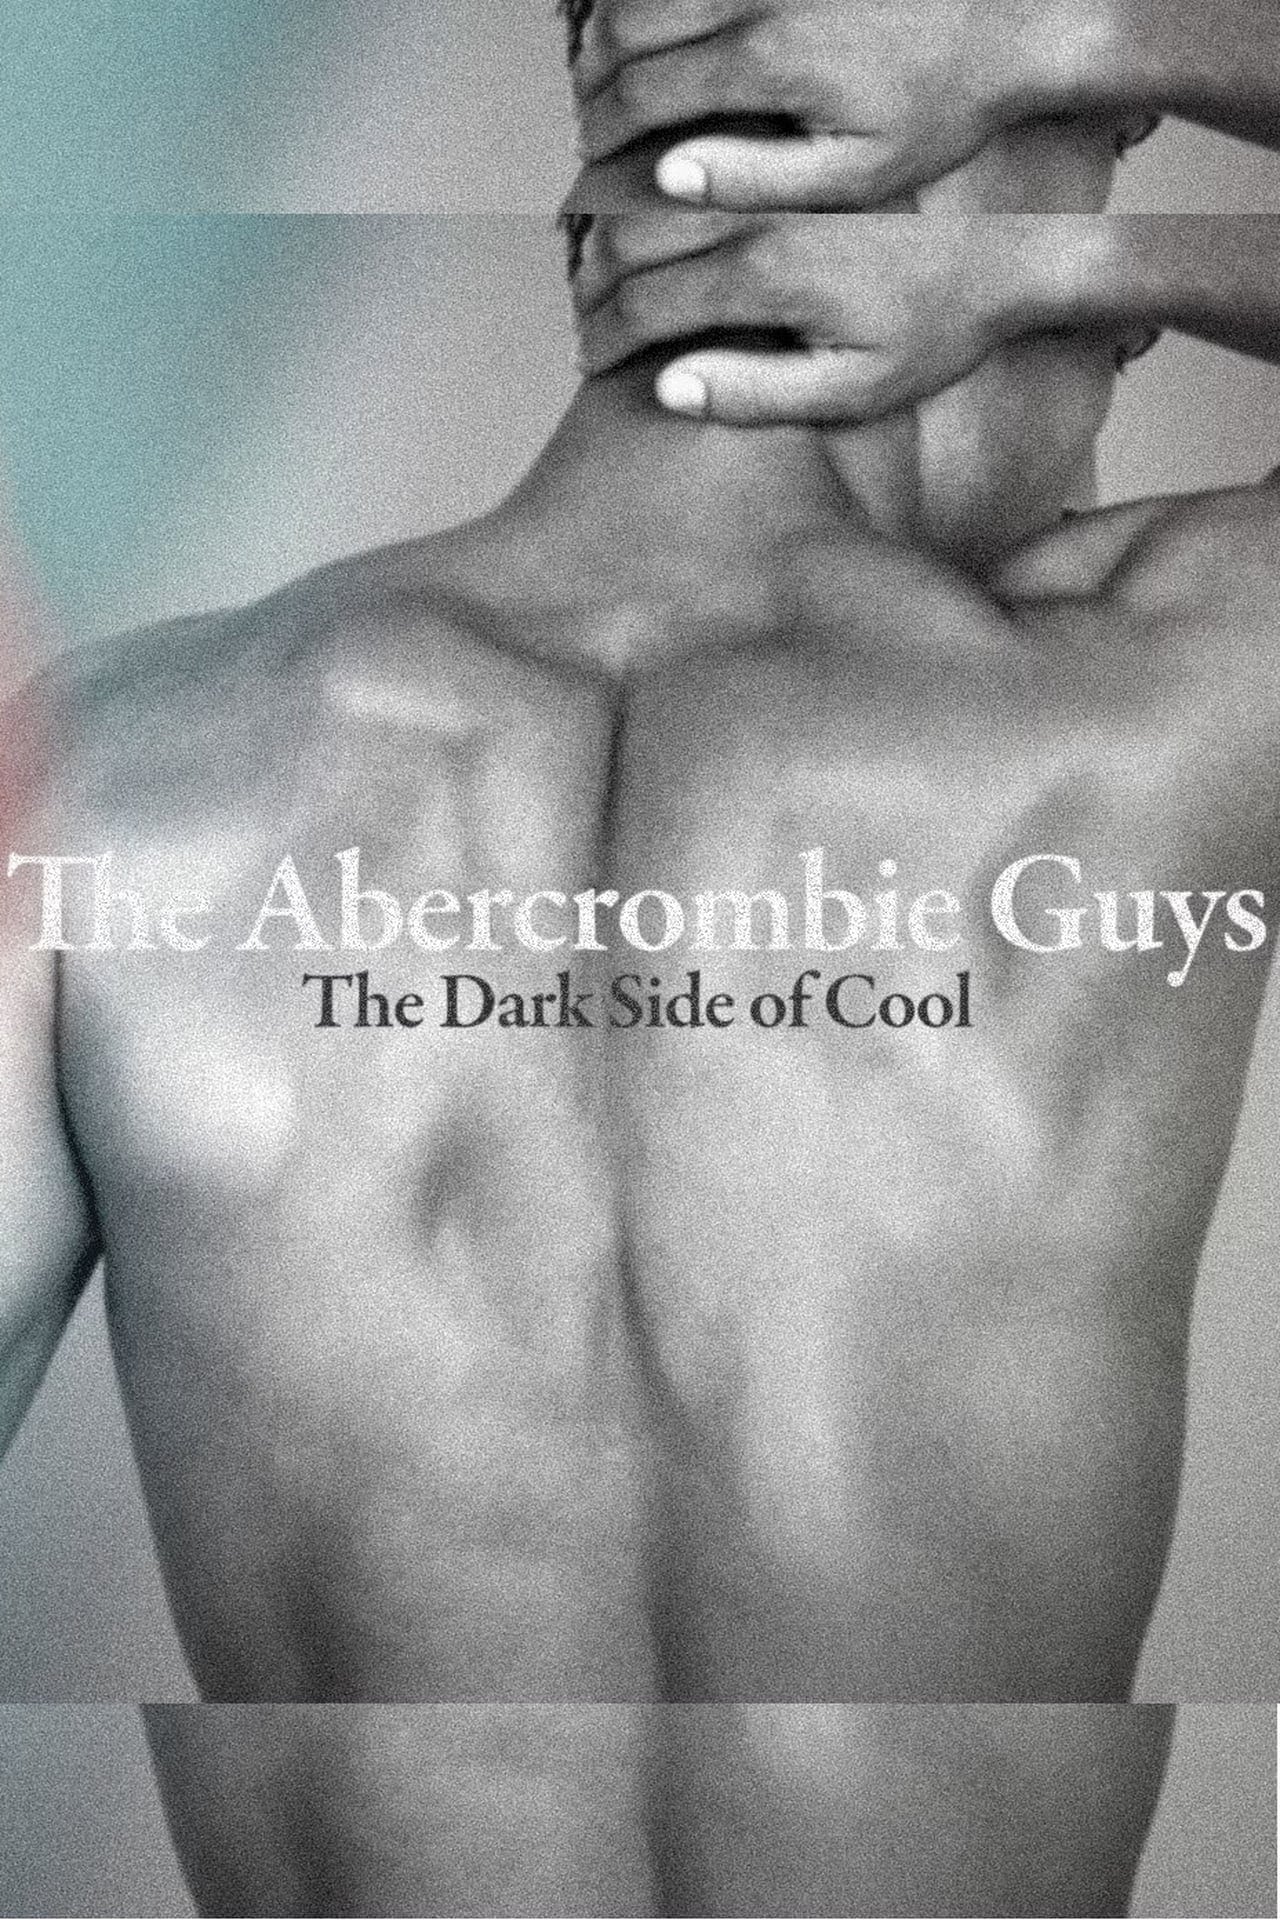 The Abercrombie Guys: The Dark Side of Cool